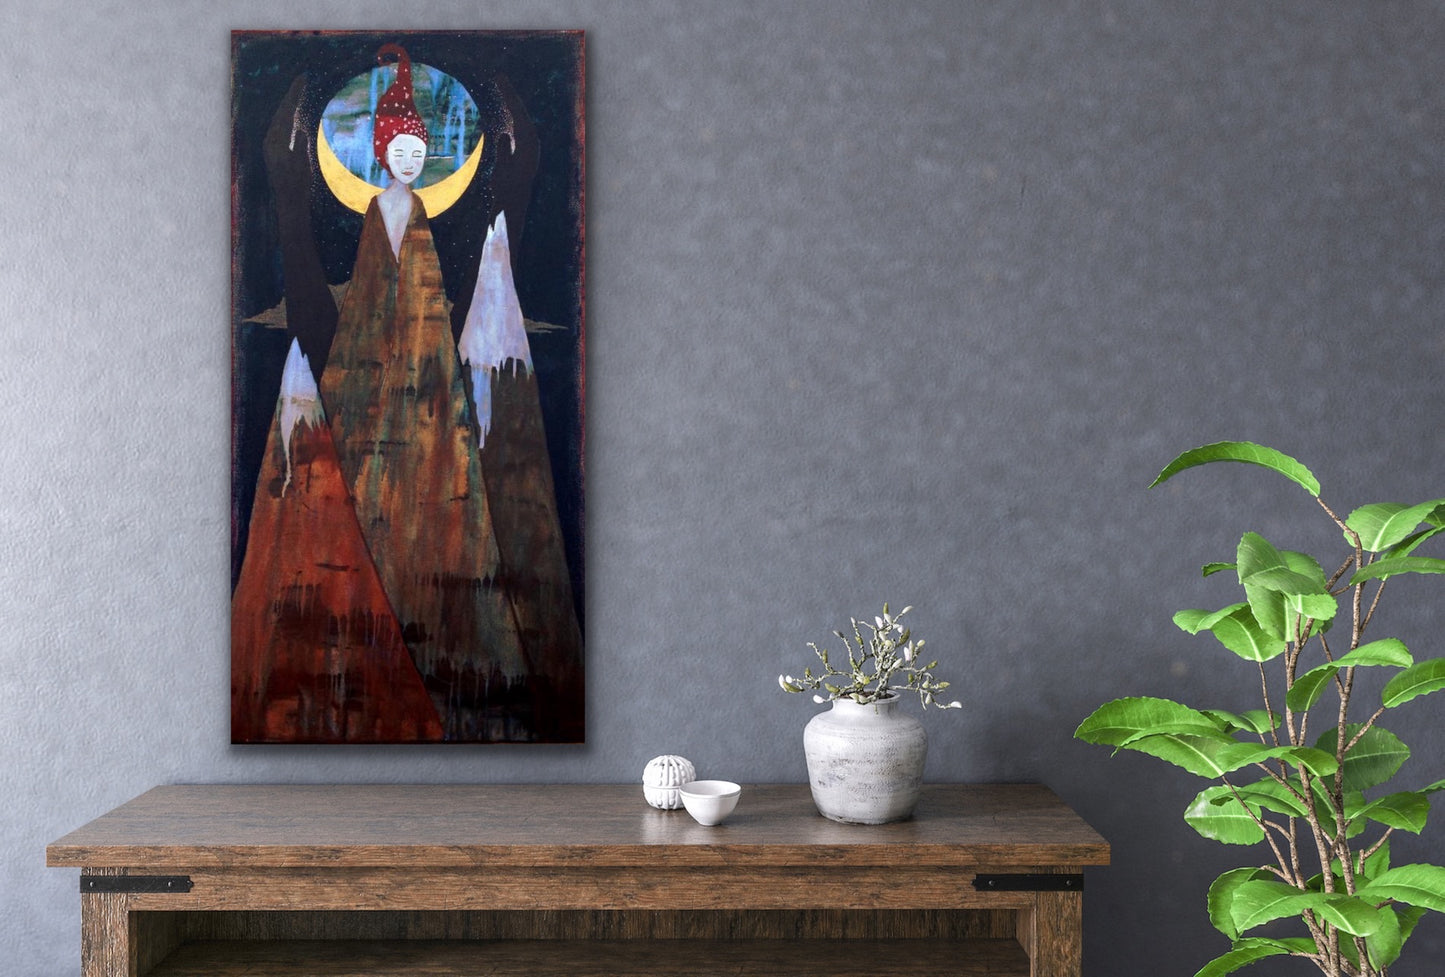 cosmic artwork depicting a woman formed from the top of a mountain. the painting is hanging on a gray wall above a wooden table with a plant and 3 white objects